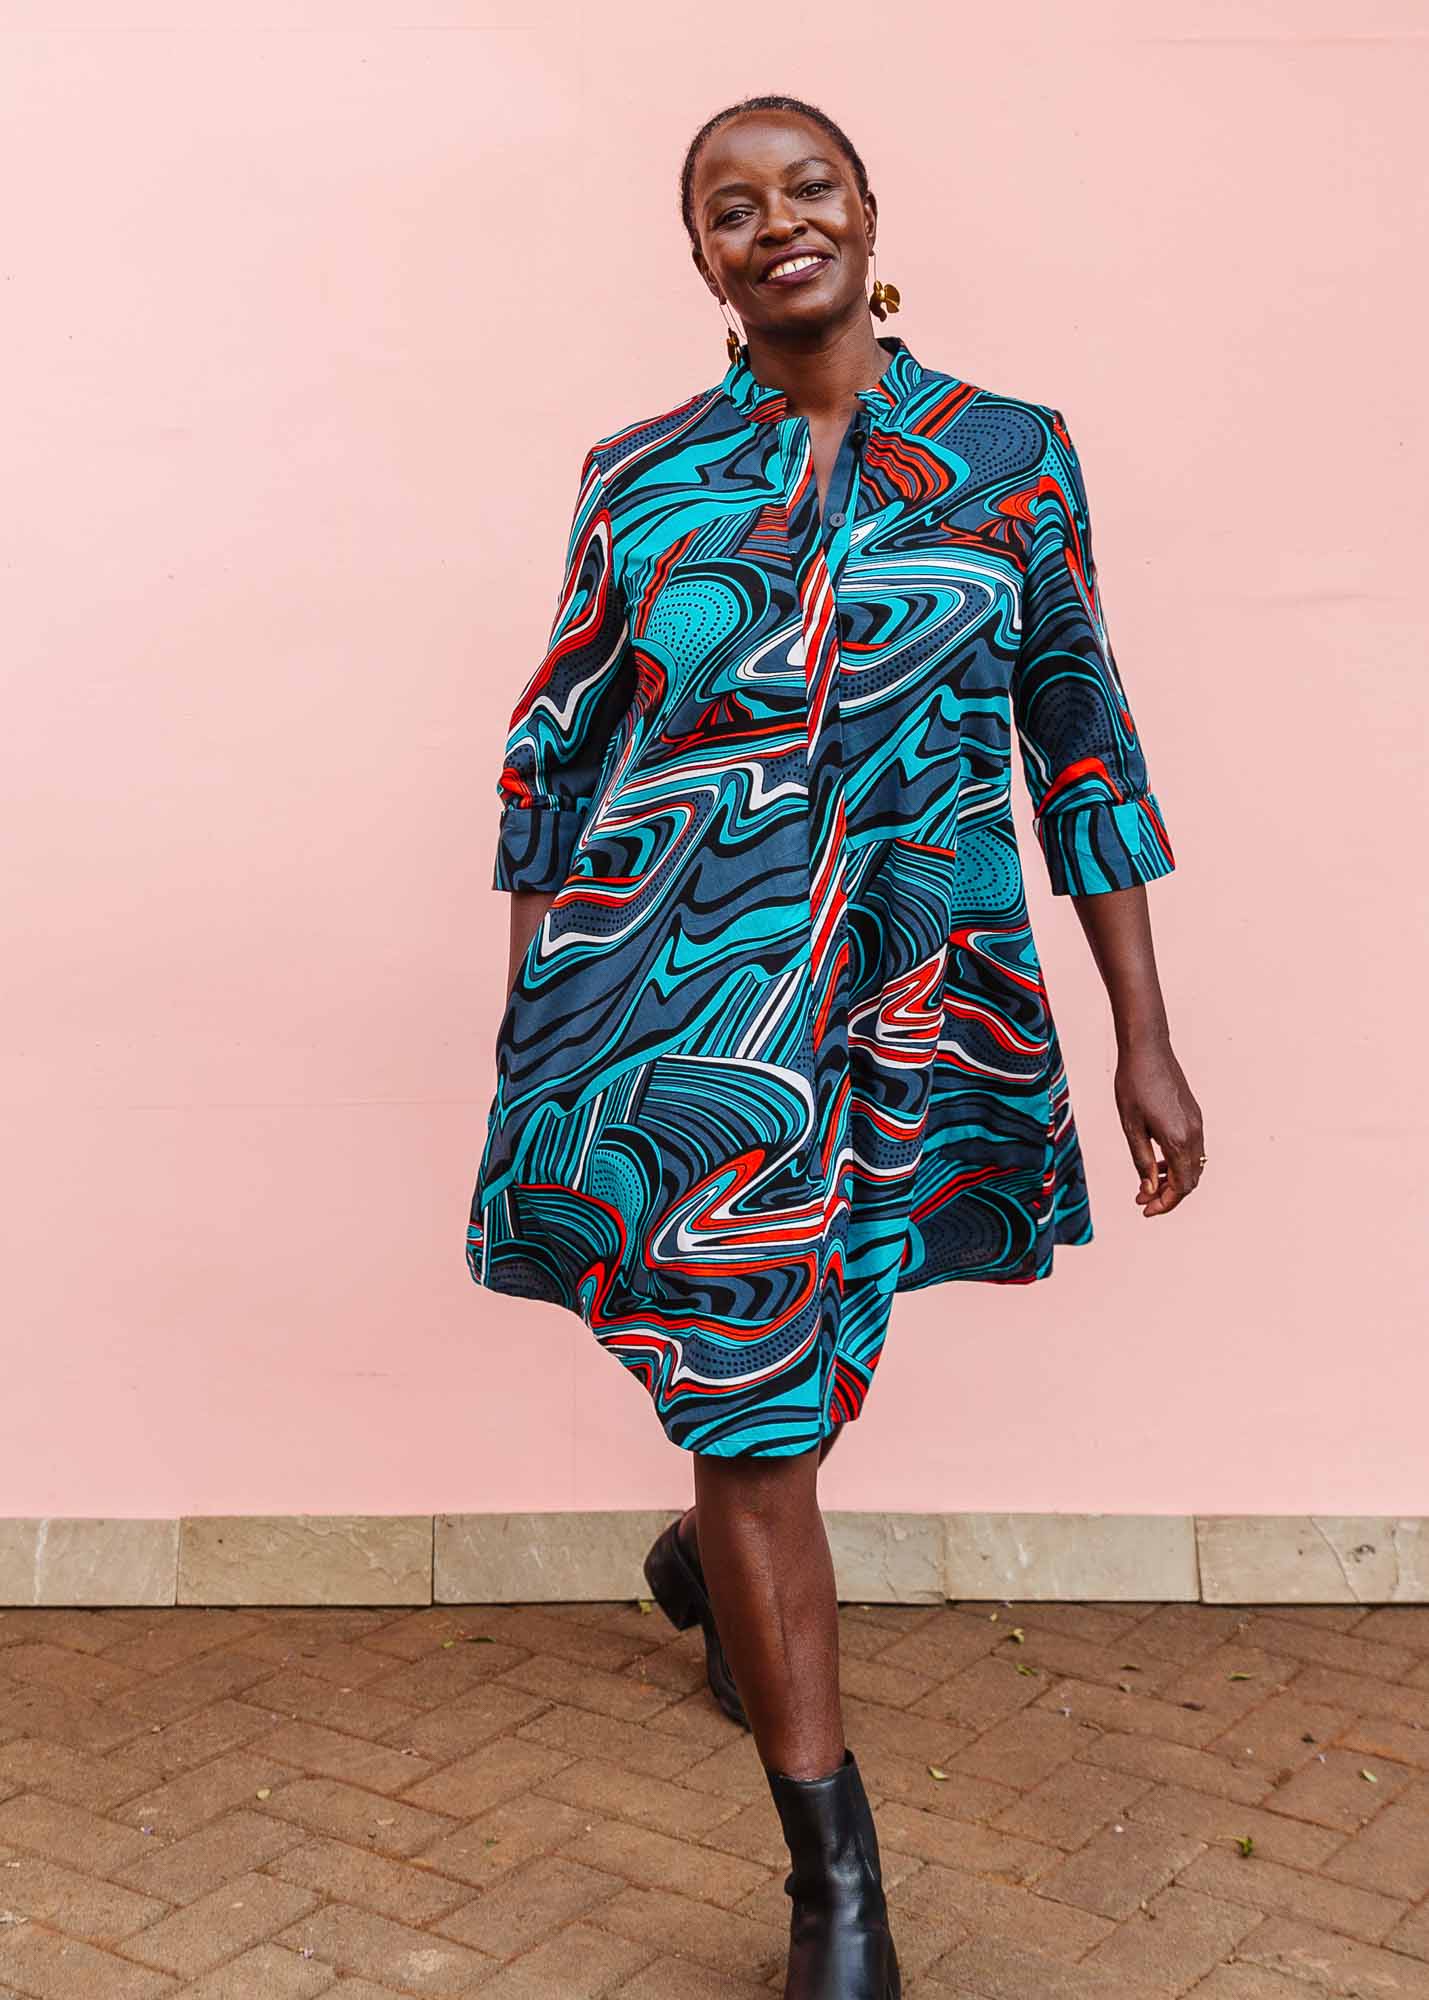 The model is wearing turquoise, black, slate, white and red abstract print dress